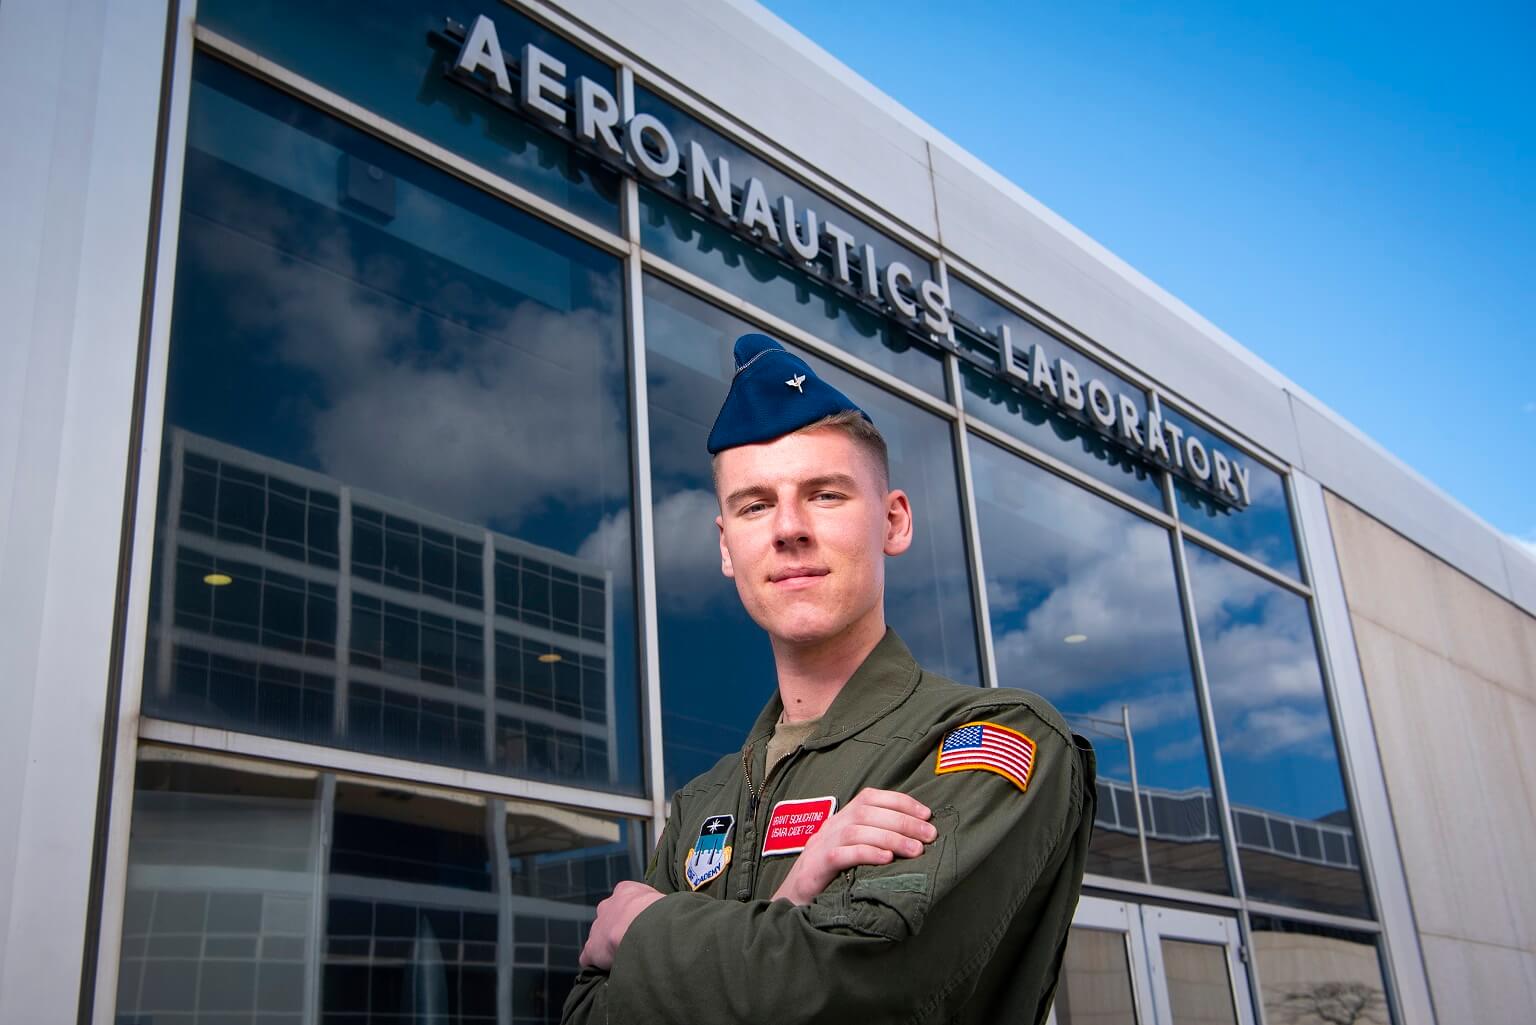 Cadet Schlichting stands in front of the United States Air Force Academy’s aeronautics laboratory